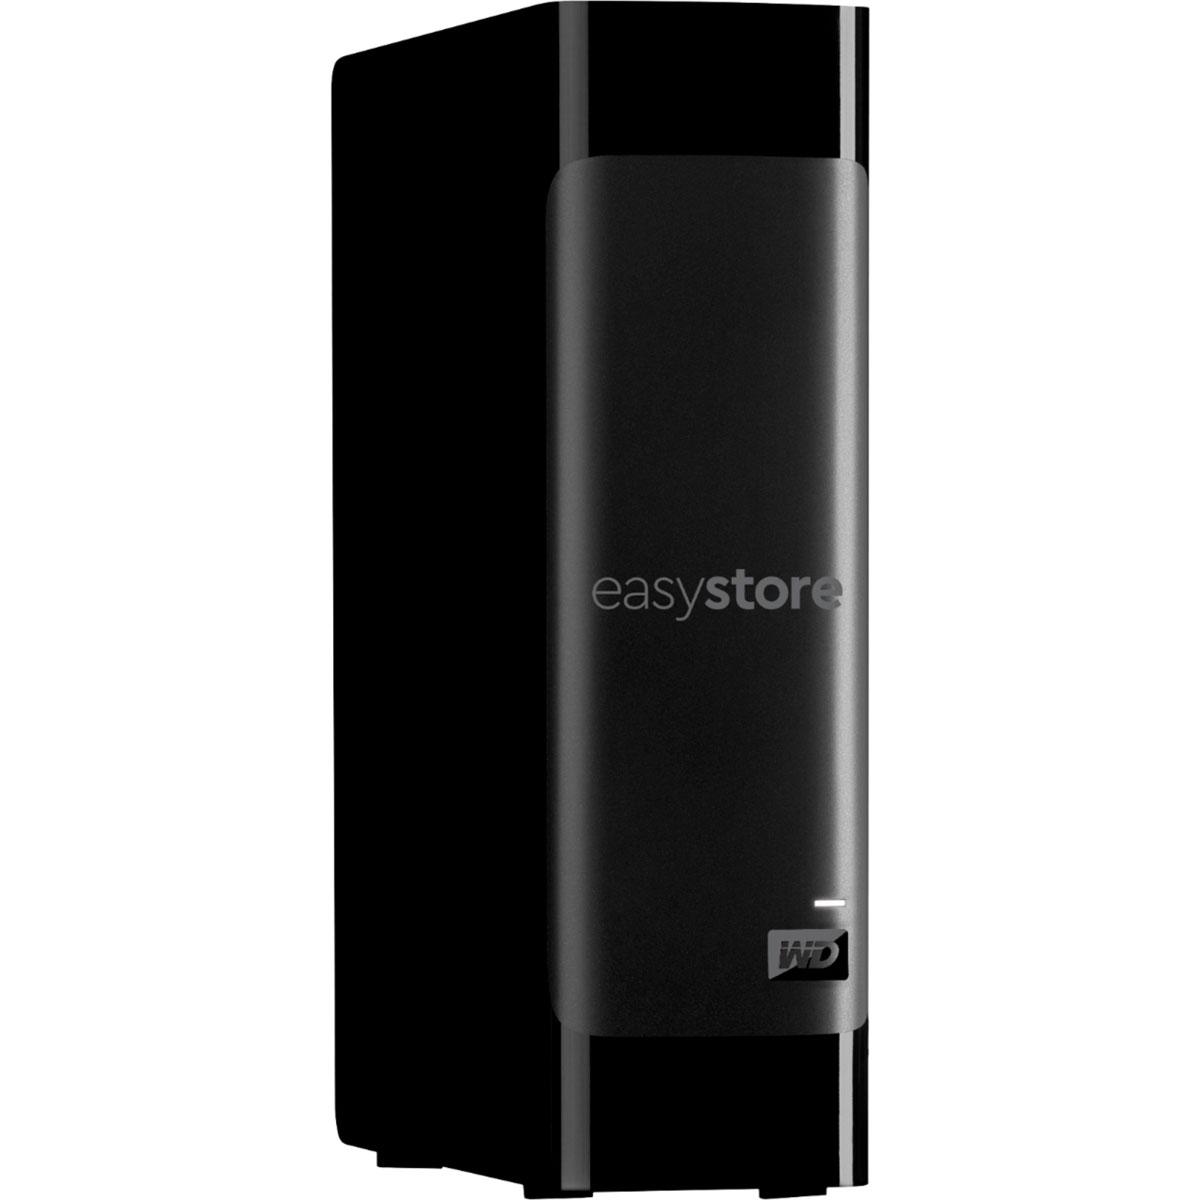 WD easystore 16TB External USB 3 Portable Hard Drive for $279.99 Shipped